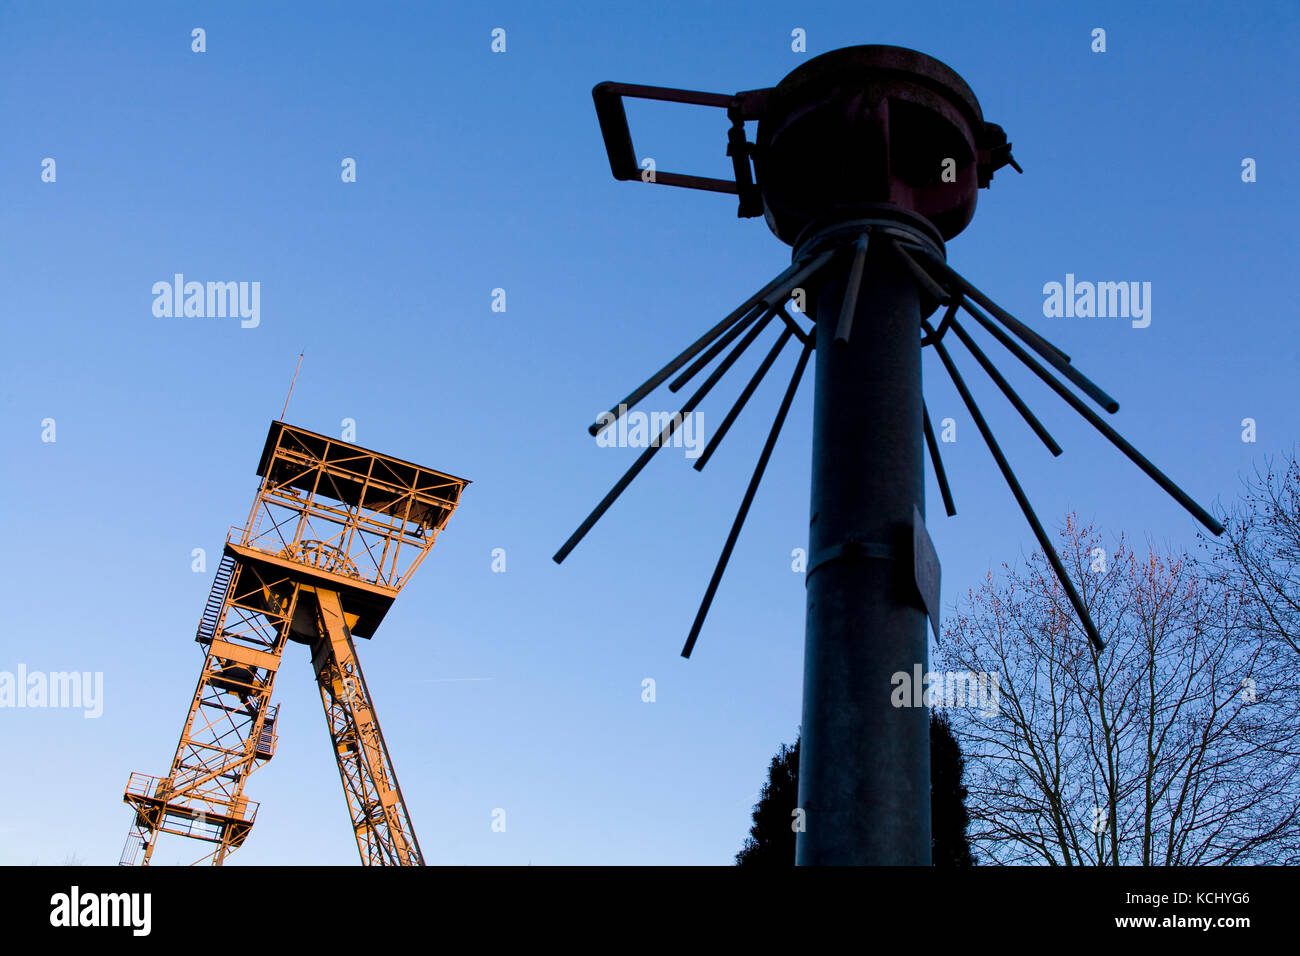 Germany, Ruhr area, Herne-Boernig, a deflagration flame arrester called Protegofilter in front of the headgear of the disused coal-mine Teutoburgia, p Stock Photo